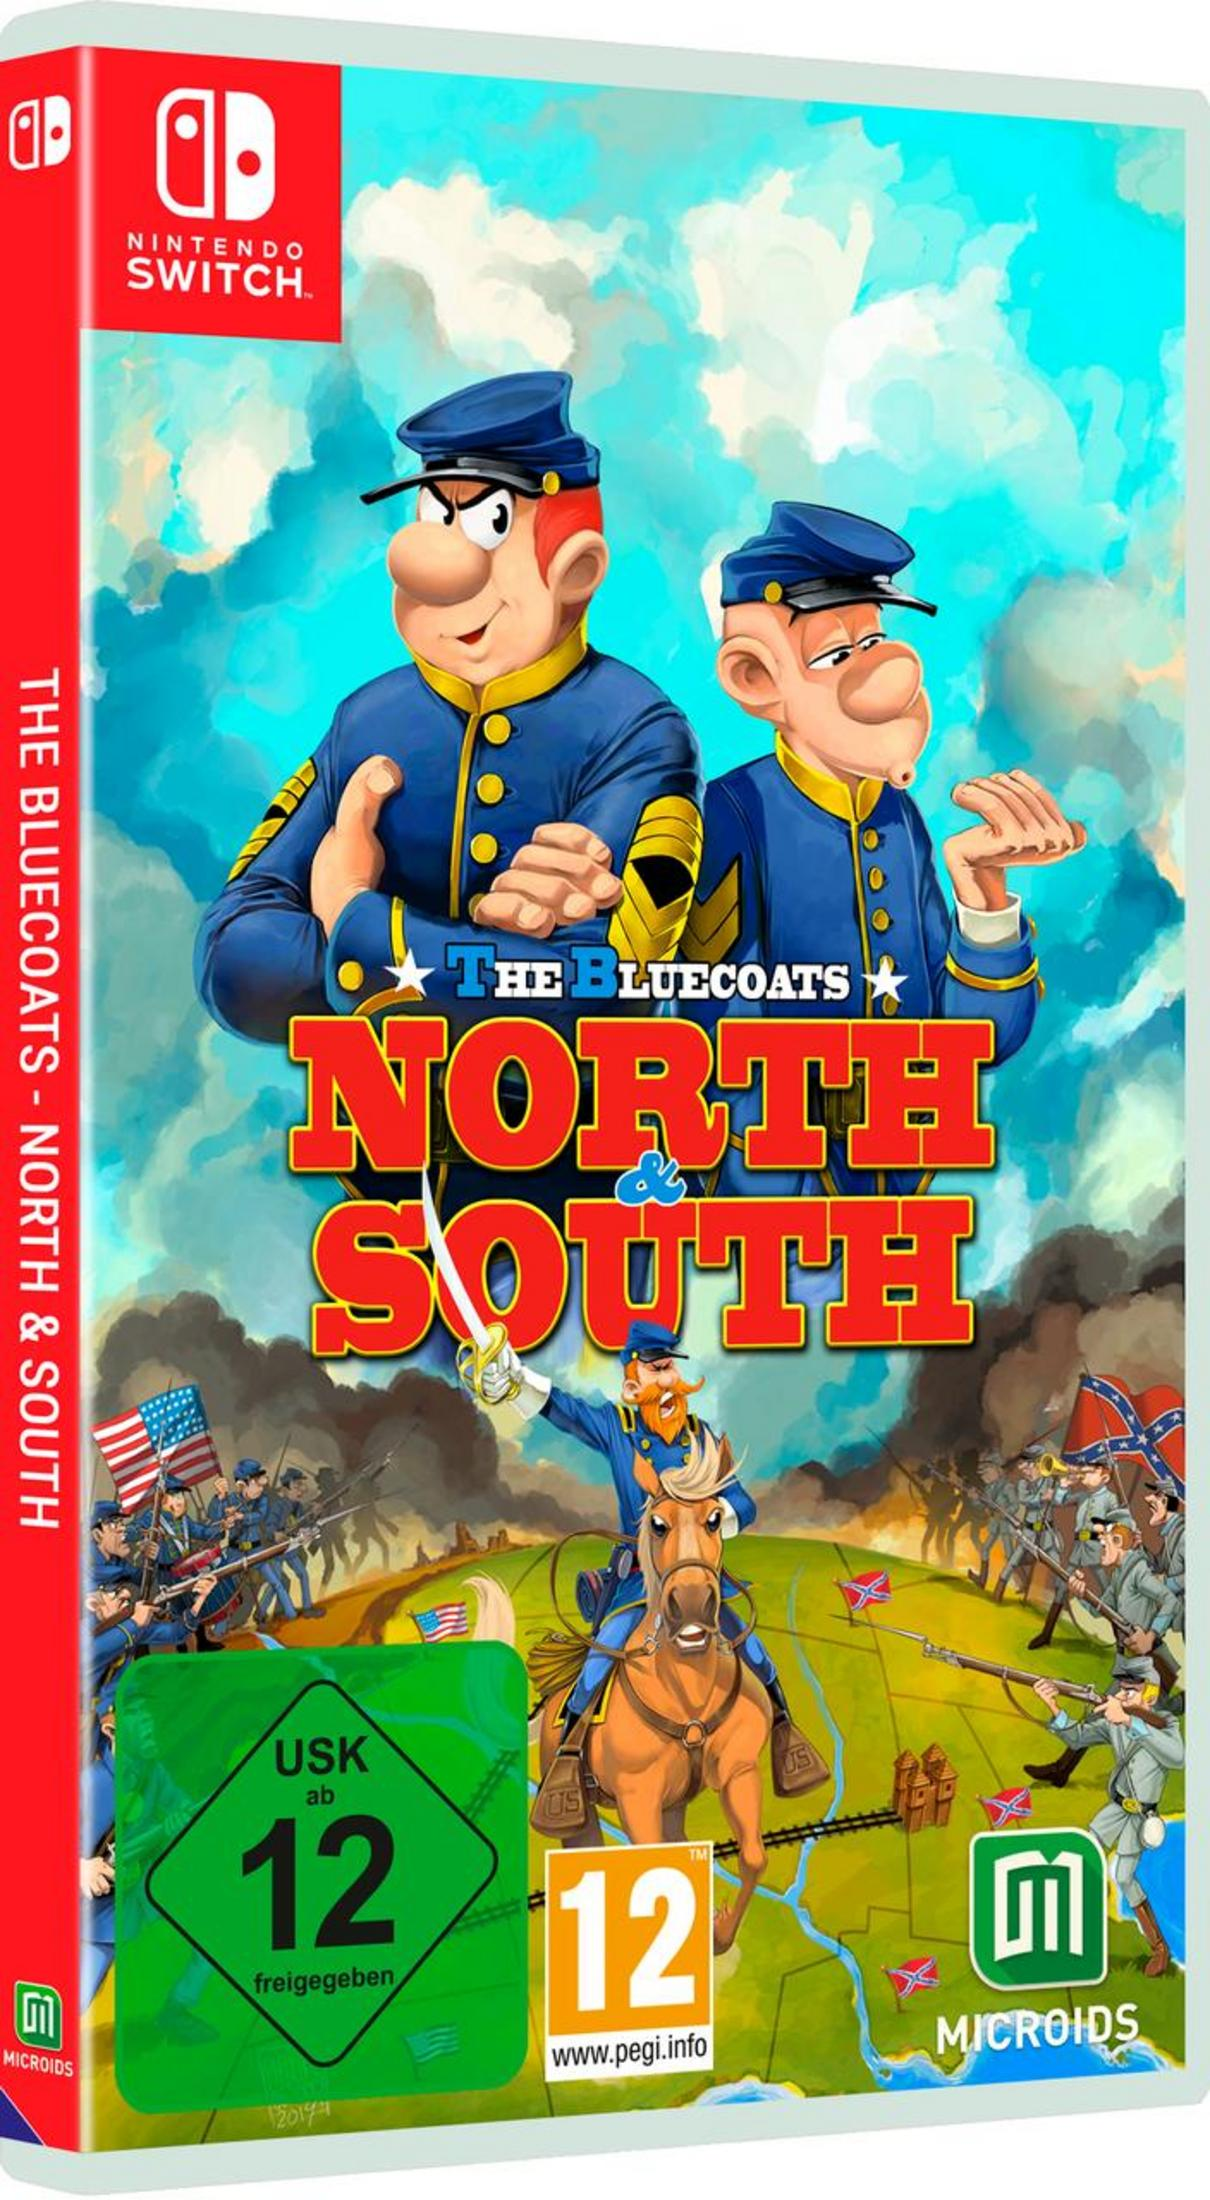 The Bluecoats: North - South and Switch] [Nintendo